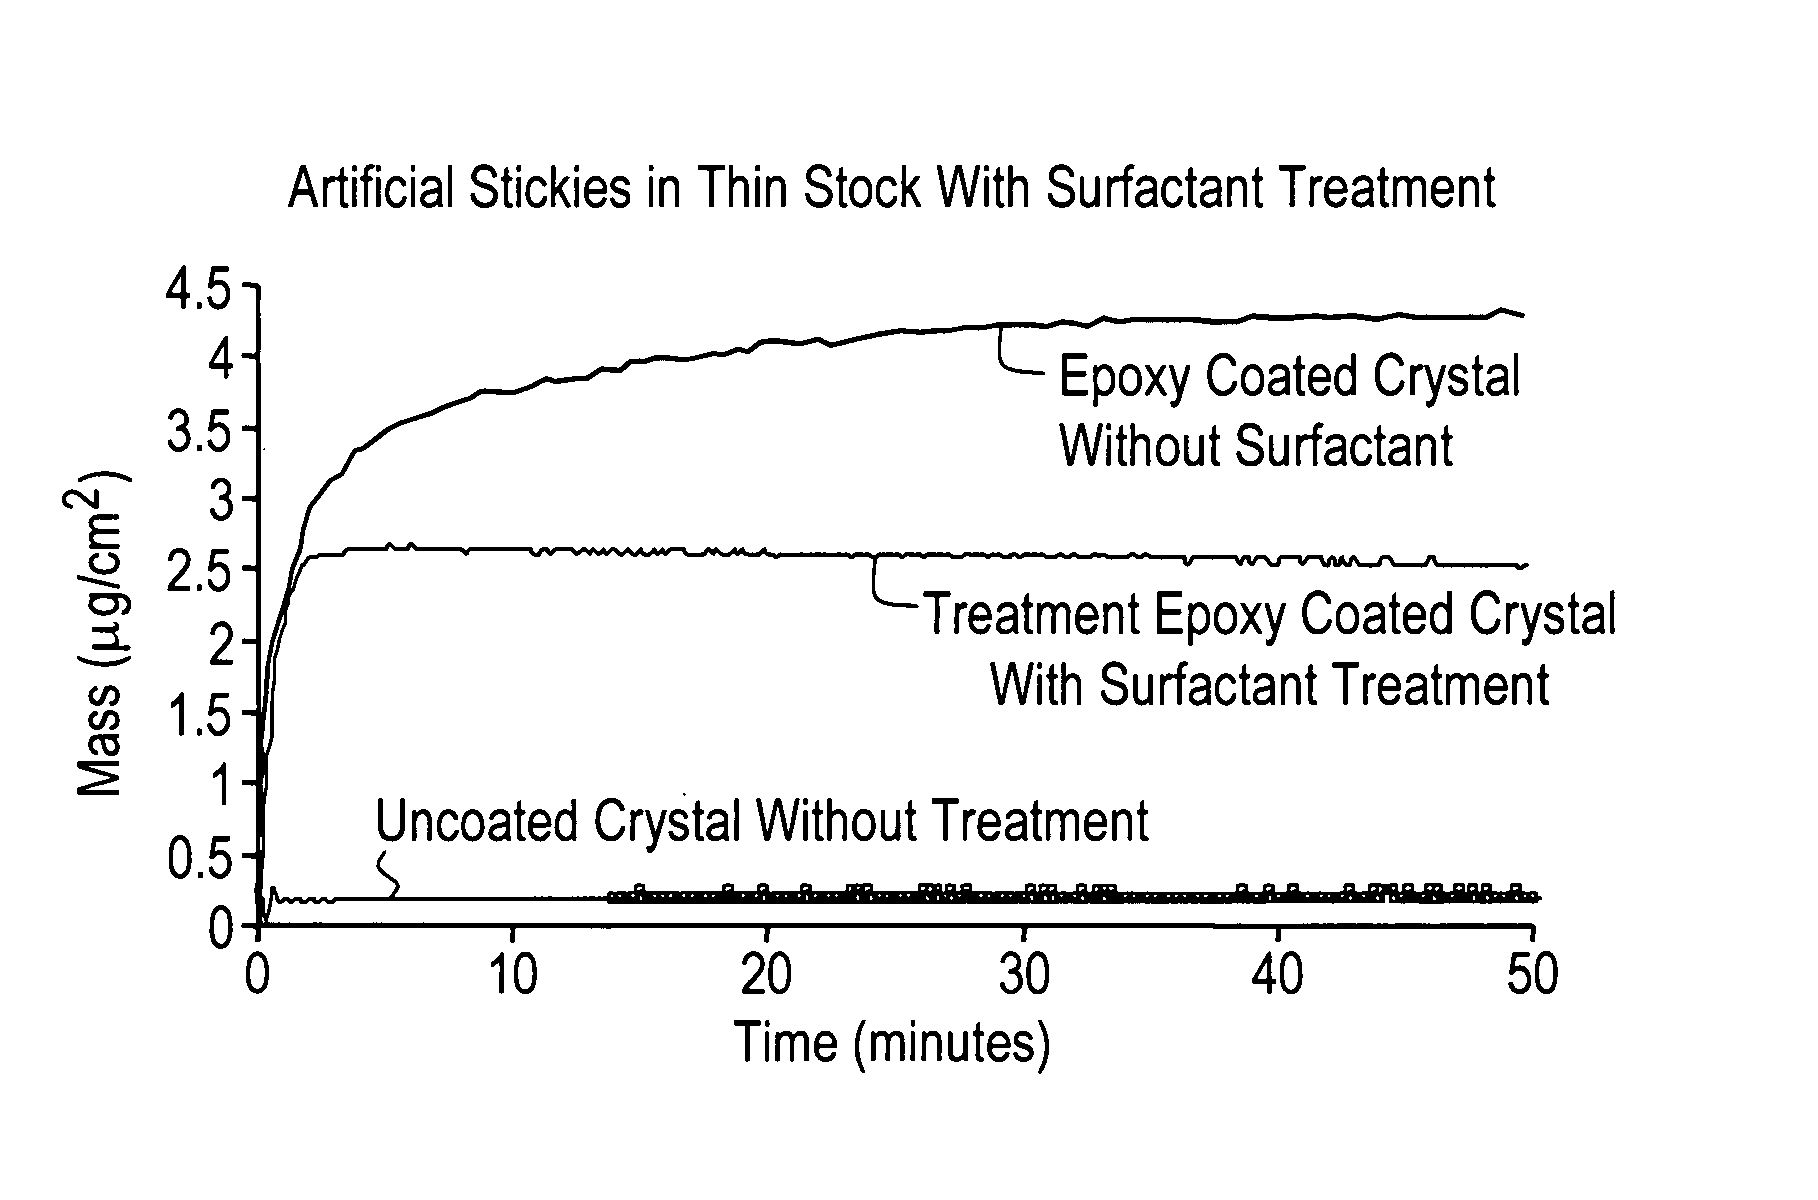 Enhanced method for monitoring the deposition of organic materials in a papermaking process